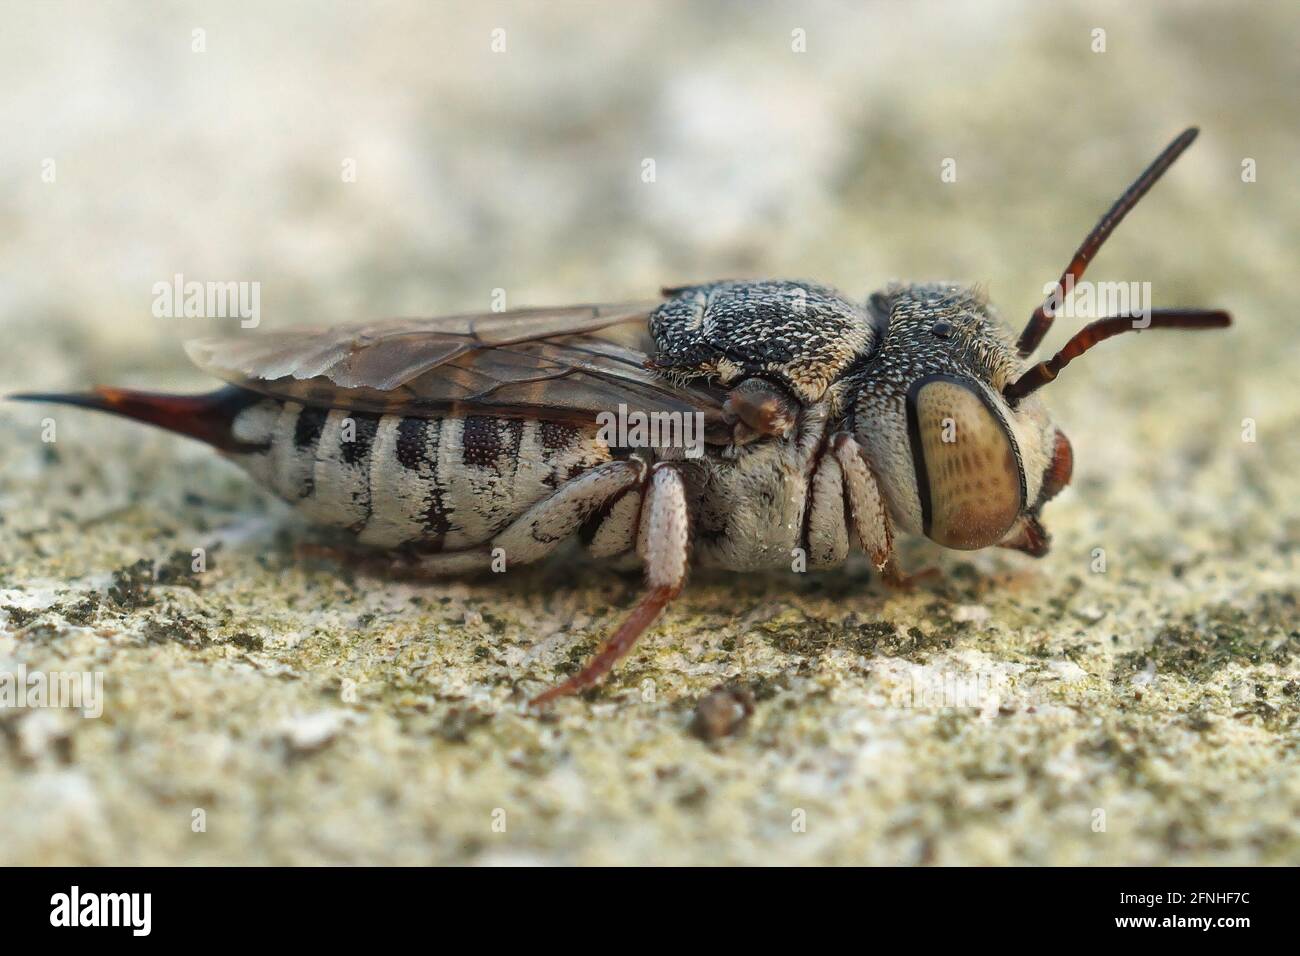 Closeup of Coelioxys acanthura insect on the ground Stock Photo